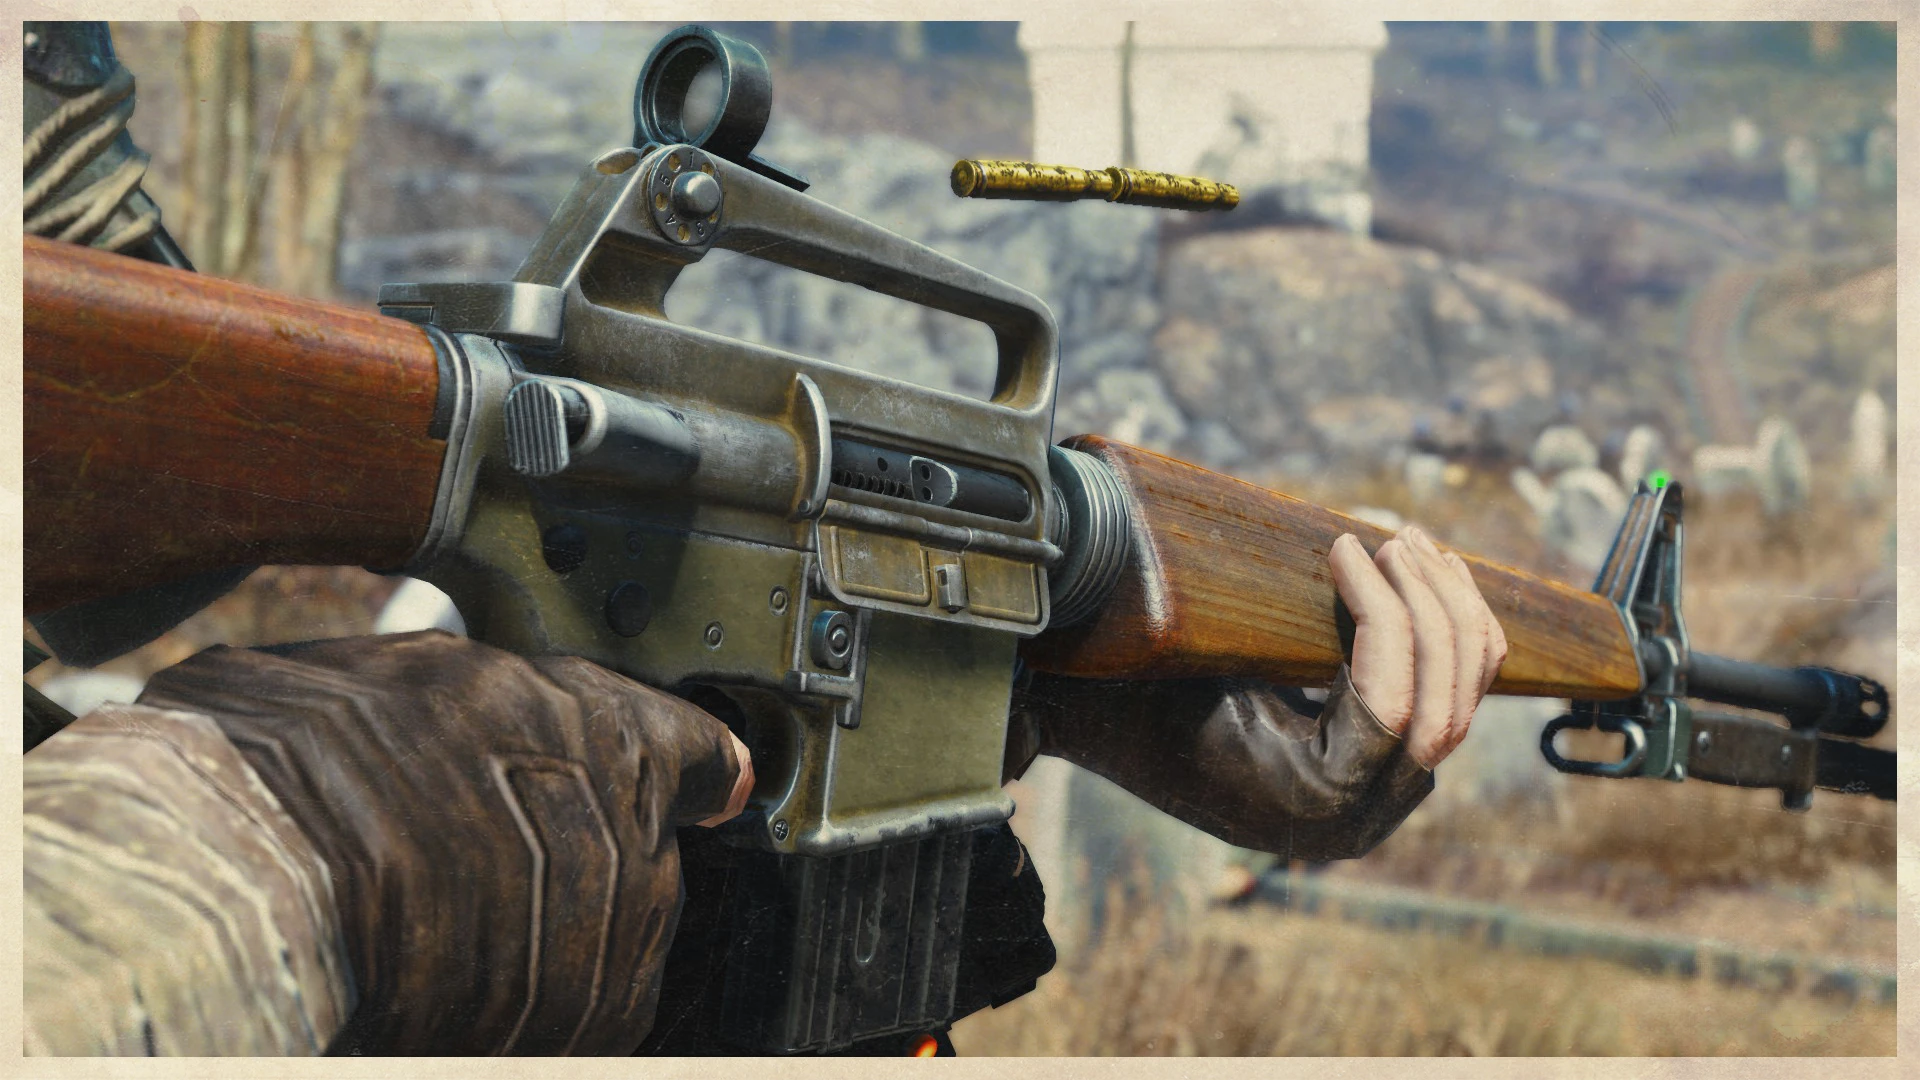 Fallout 4 handmade rifle in commonwealth фото 43